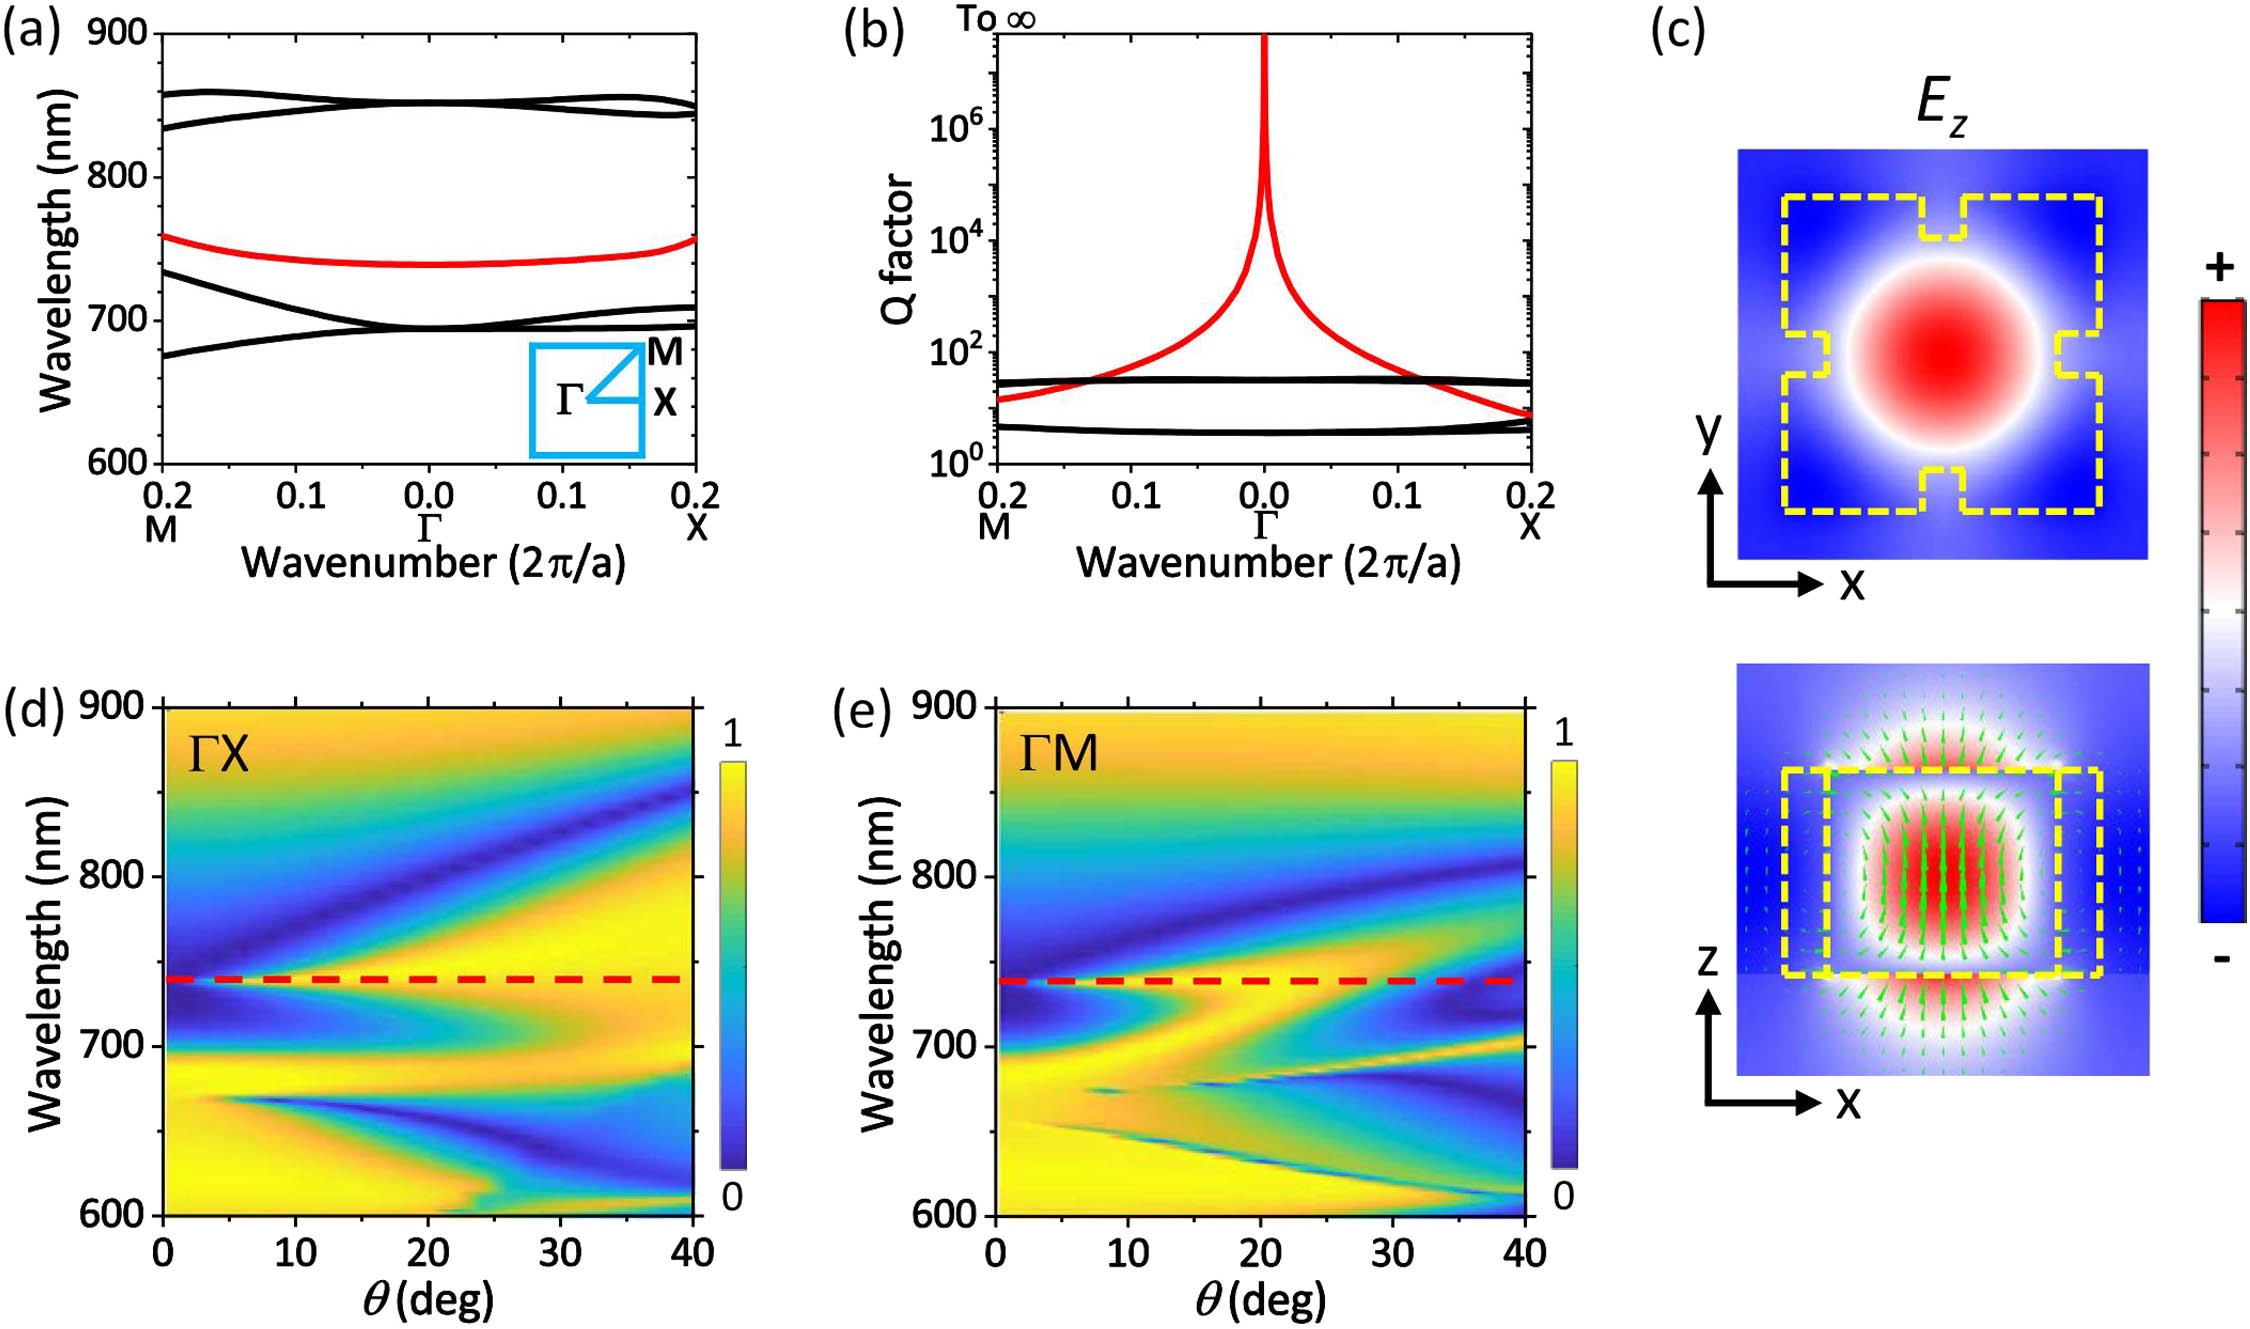 (a) Dispersion bands around 740 nm of the proposed dielectric metasurface Laplace operator in both ΓX and ΓM directions. The band of interest highlighted with red corresponds to the quasi-BIC. The inset shows the irreducible Brillouin zone. (b) Corresponding Q factors of the five bands in (a). The red color corresponds to the quasi-BIC band. (c) Ez field distribution of the BIC at the Γ point. Top panel, top view at the central plane of the unit cell; bottom panel, cross-sectional view at the central plane of the unit cell. The yellow dashed lines highlight the profile of the structure, while the green arrows indicate the electric field. The red and blue colors represent the positive and negative values, respectively. (d) and (e) Transmittance spectra as functions of the incident angle for the p polarization in the ΓX and ΓM directions, respectively.